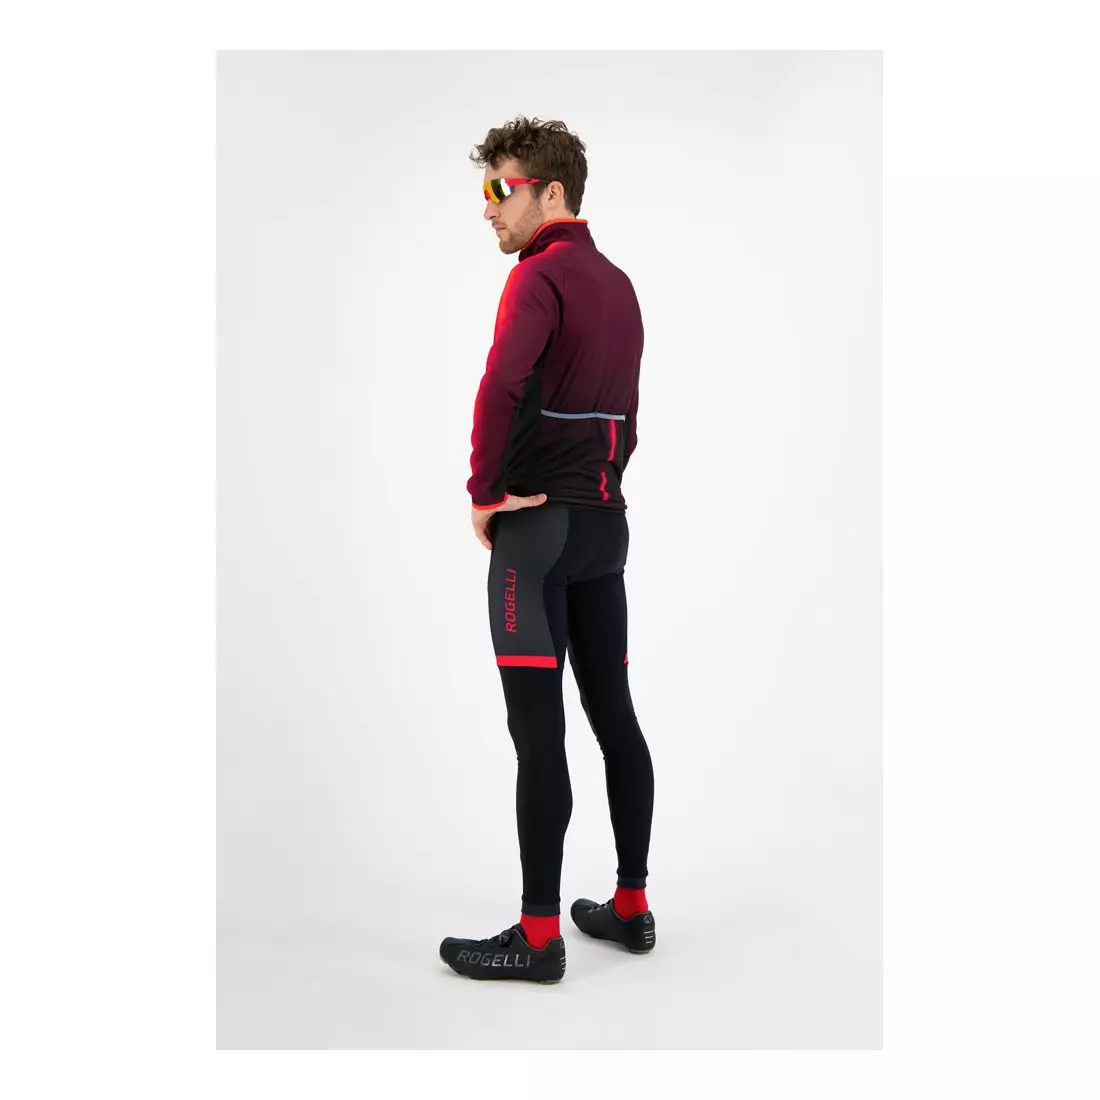 ROGELLI men's bicycle trousers with braces FUSE red